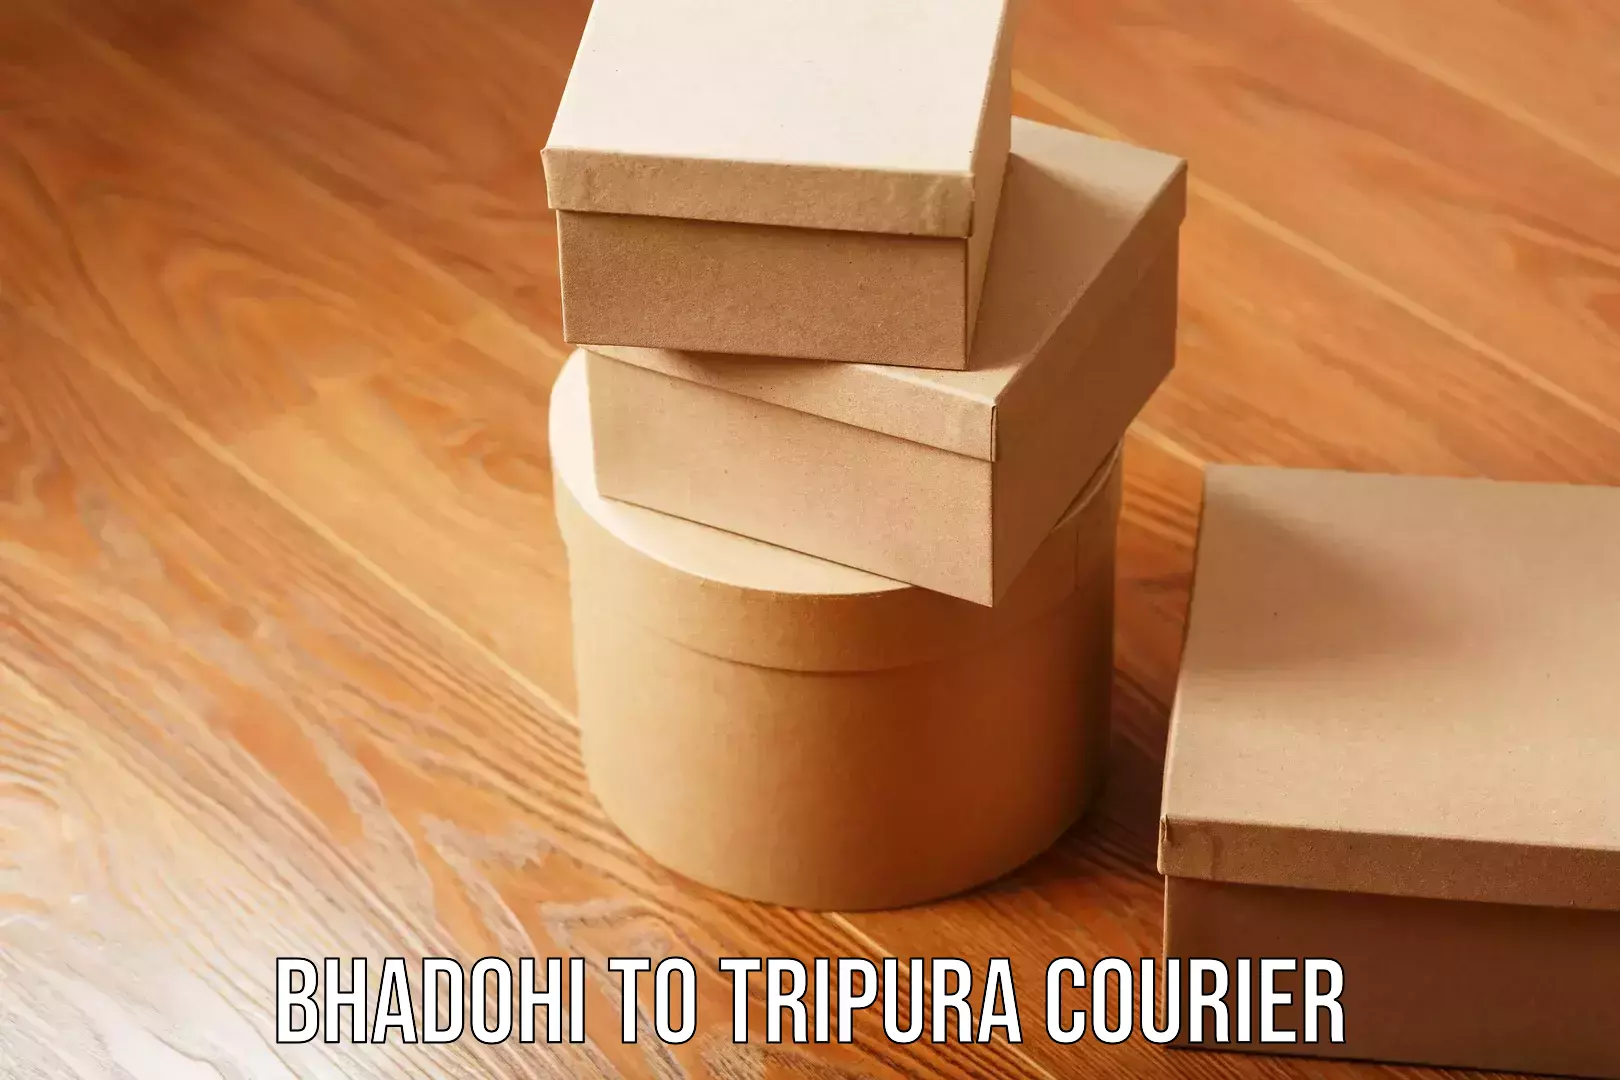 Specialized shipment handling in Bhadohi to Tripura